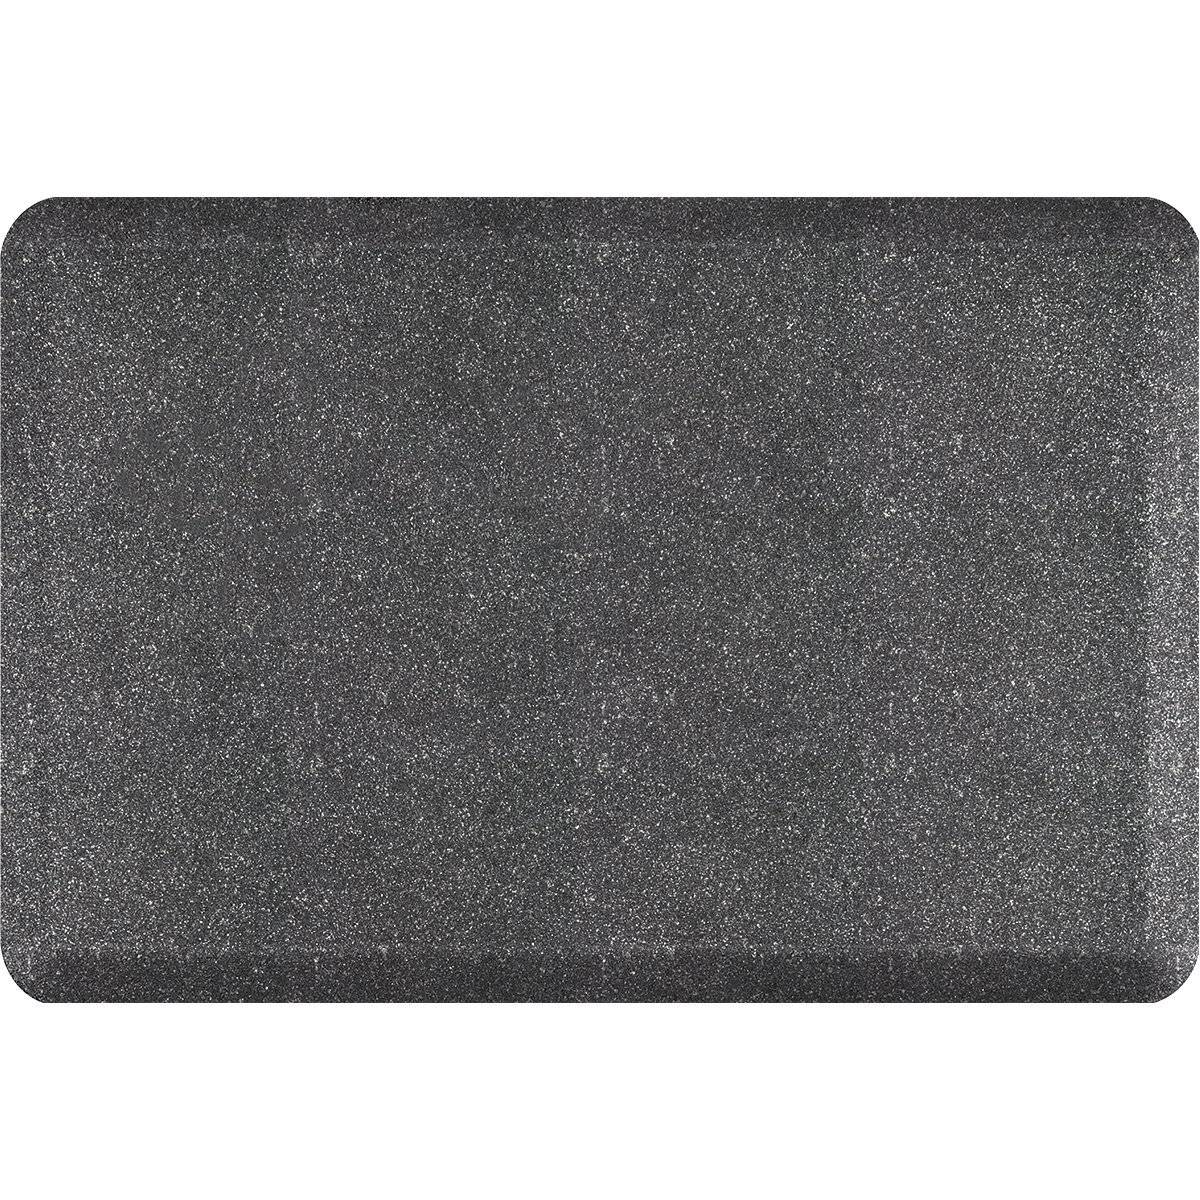 WellnessMats Granite 3'X2' 32WMRGS, Granite SteelA floor mat that has smooth surface. An ergo mat that gives comfort and relaxation while working in the kitchen or in any part of the house.